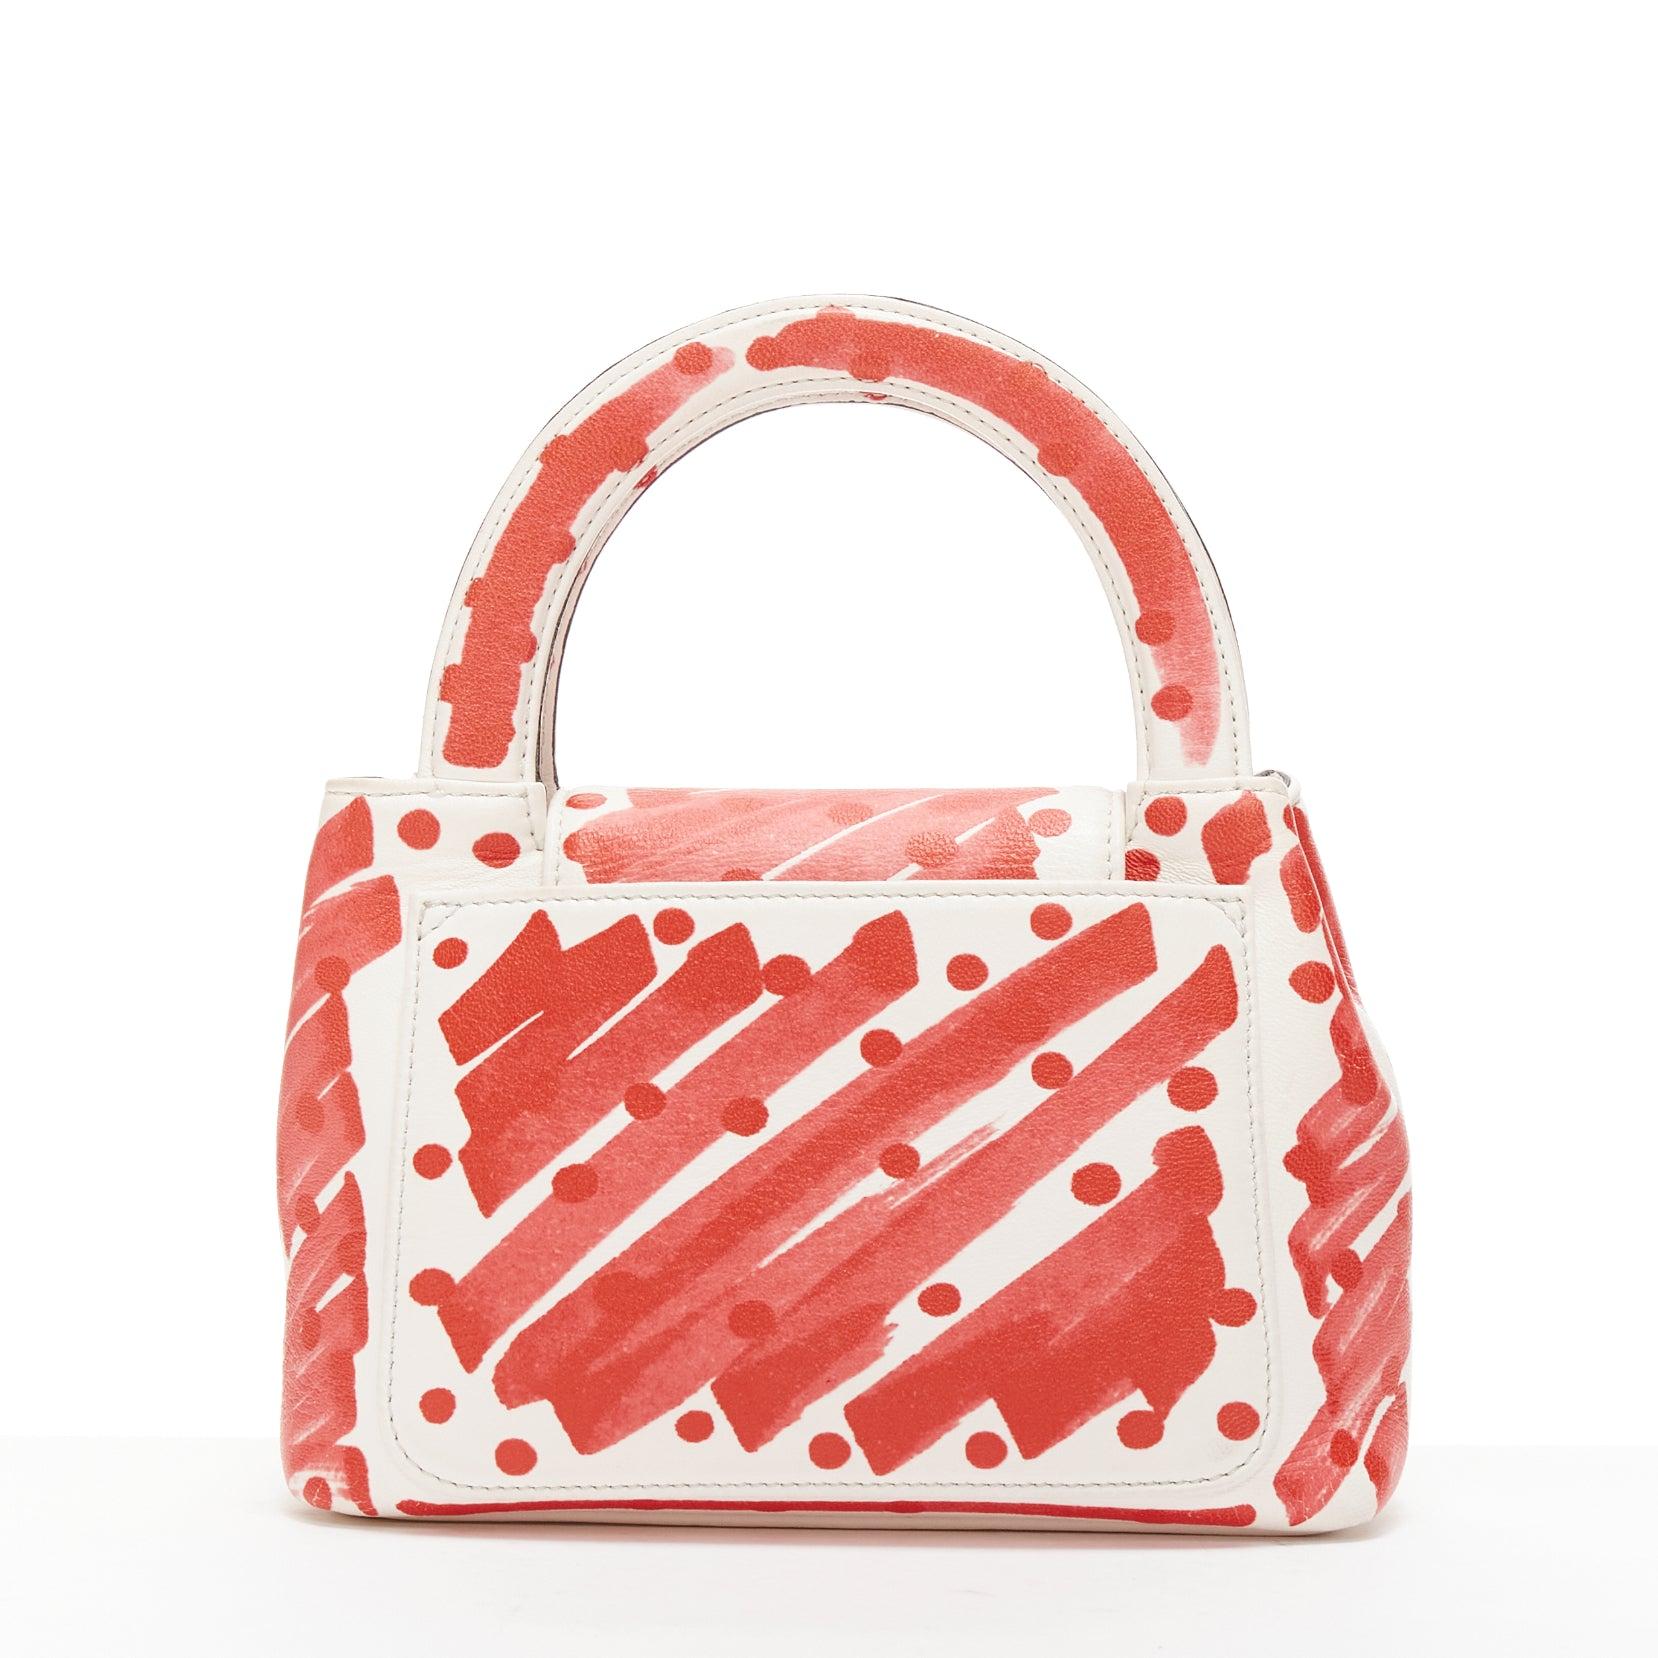 MOSCHINO Jeremy Scott 2019 Runway red white scribble marker crossbody bag For Sale 1